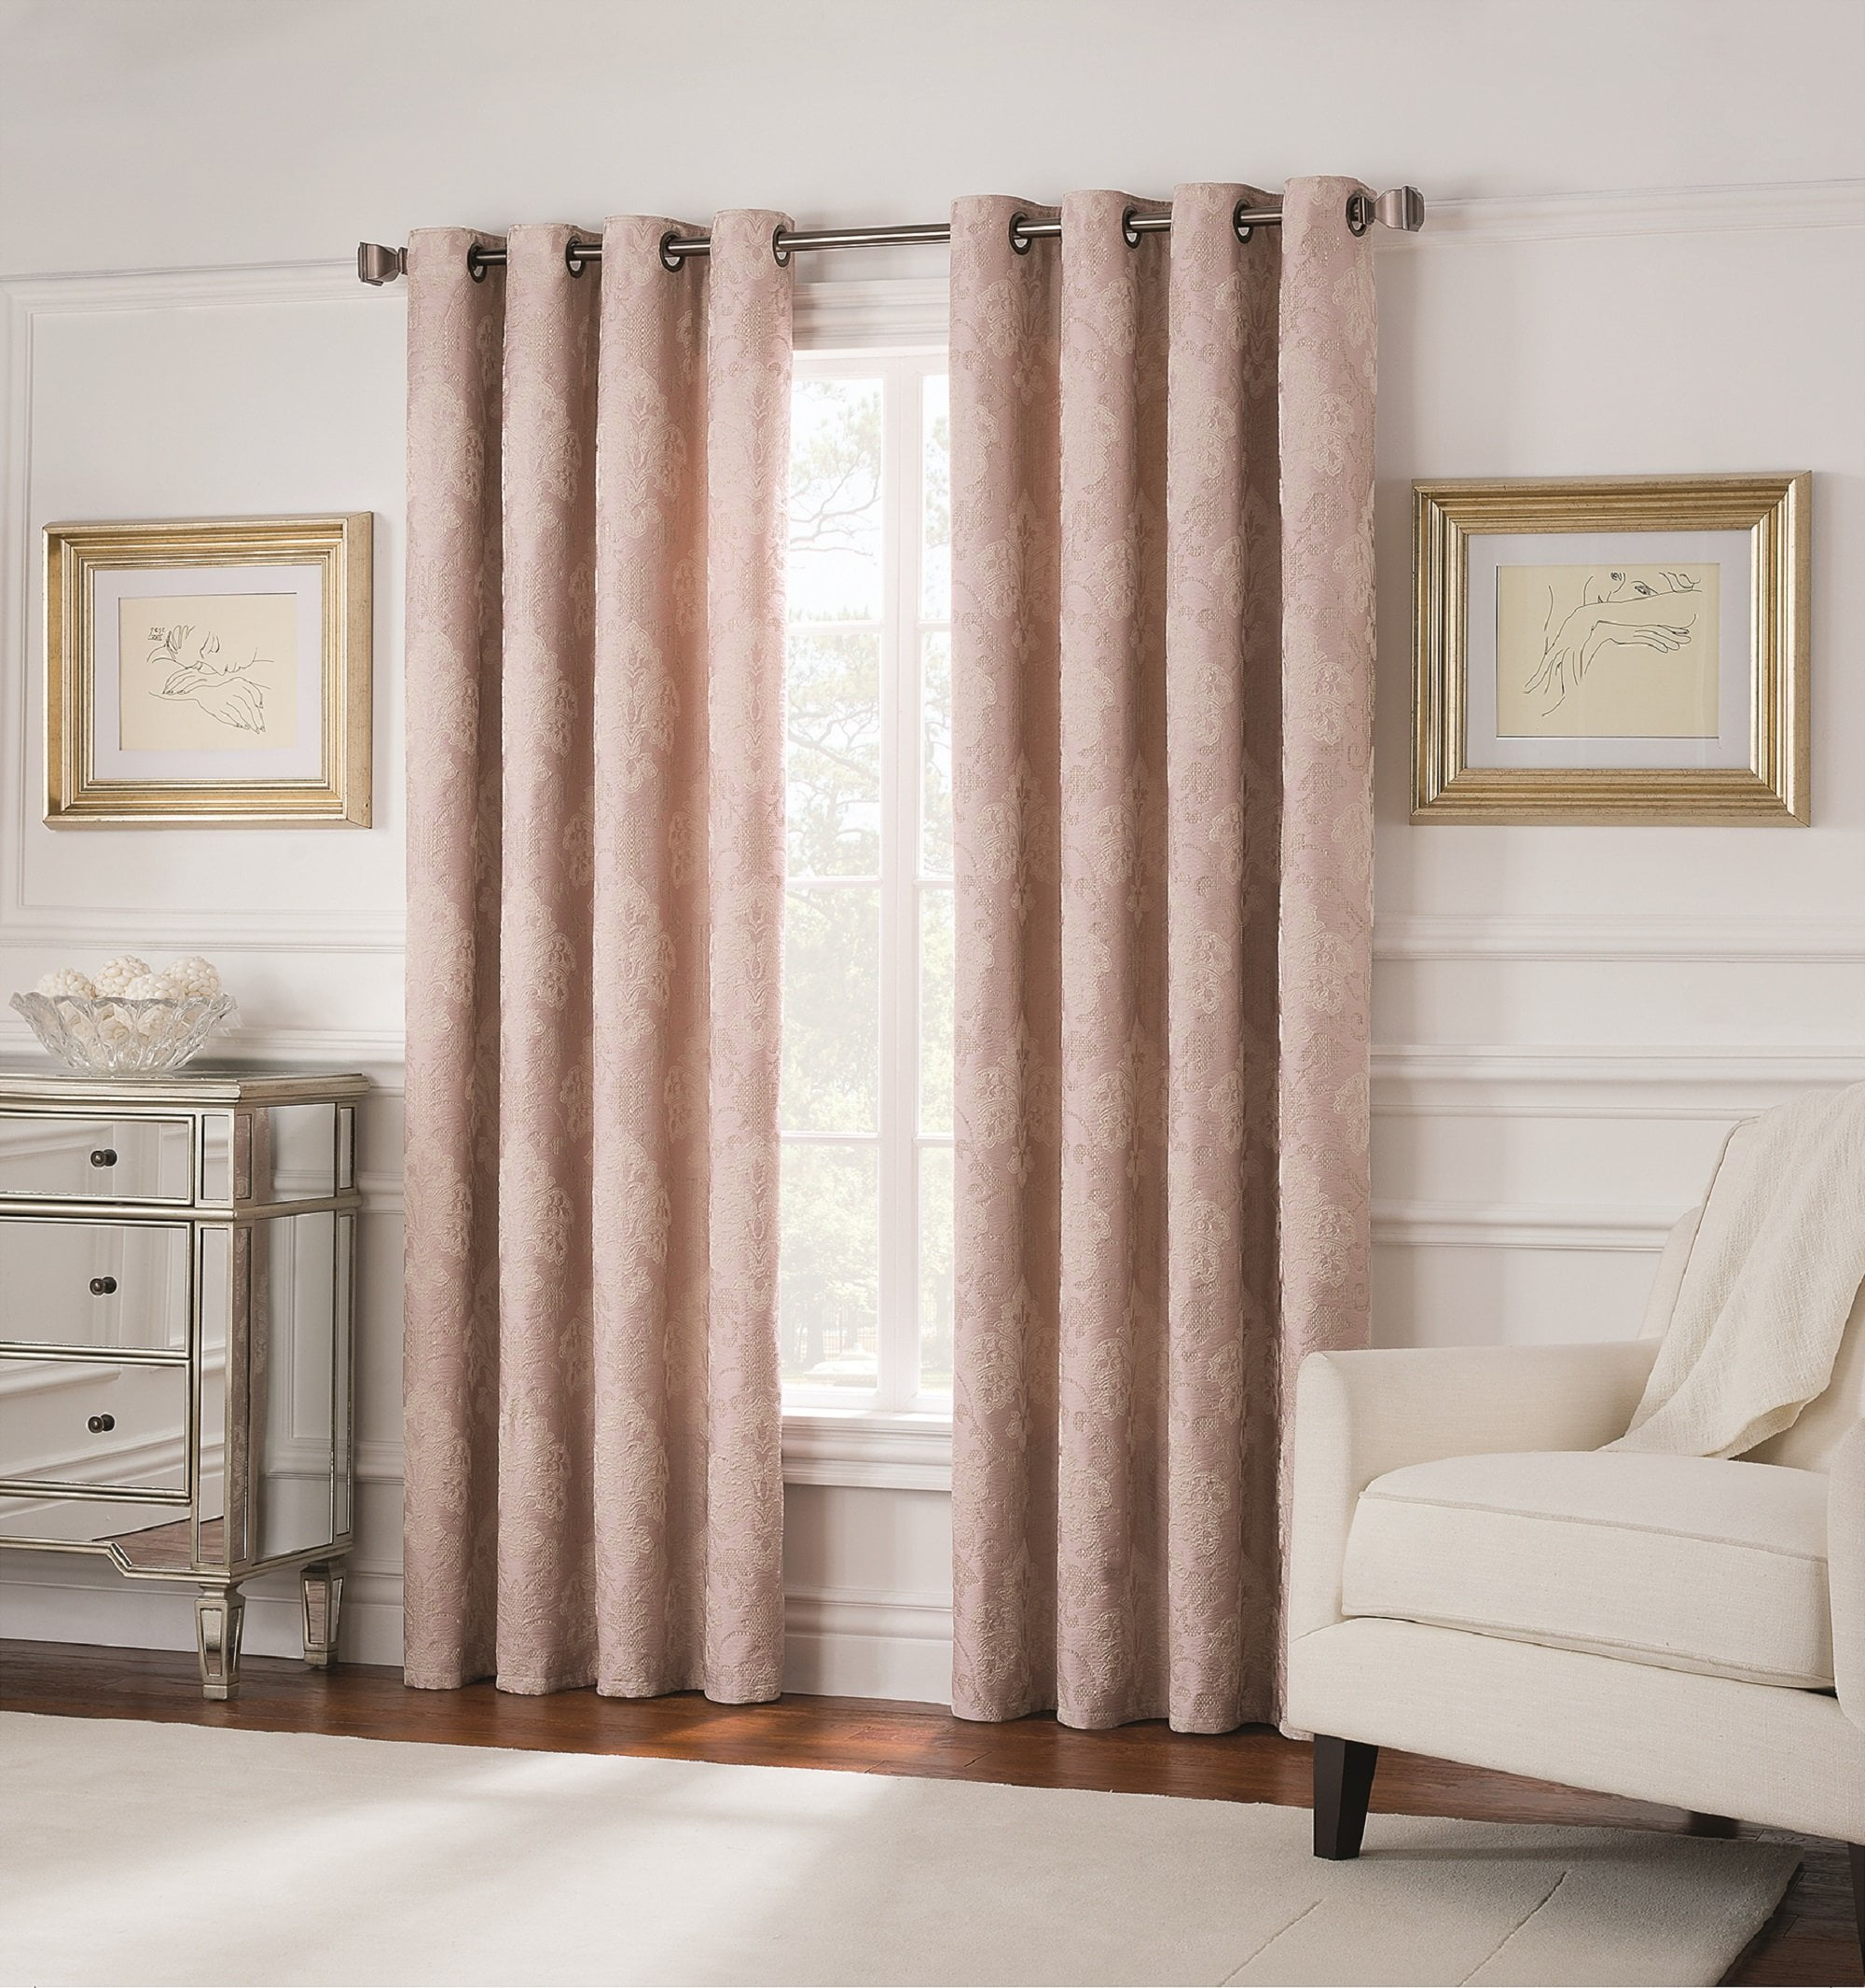 Belvedere Pencil Pleat Taped Top Blackout Curtains Thermal and Noise Reducing 